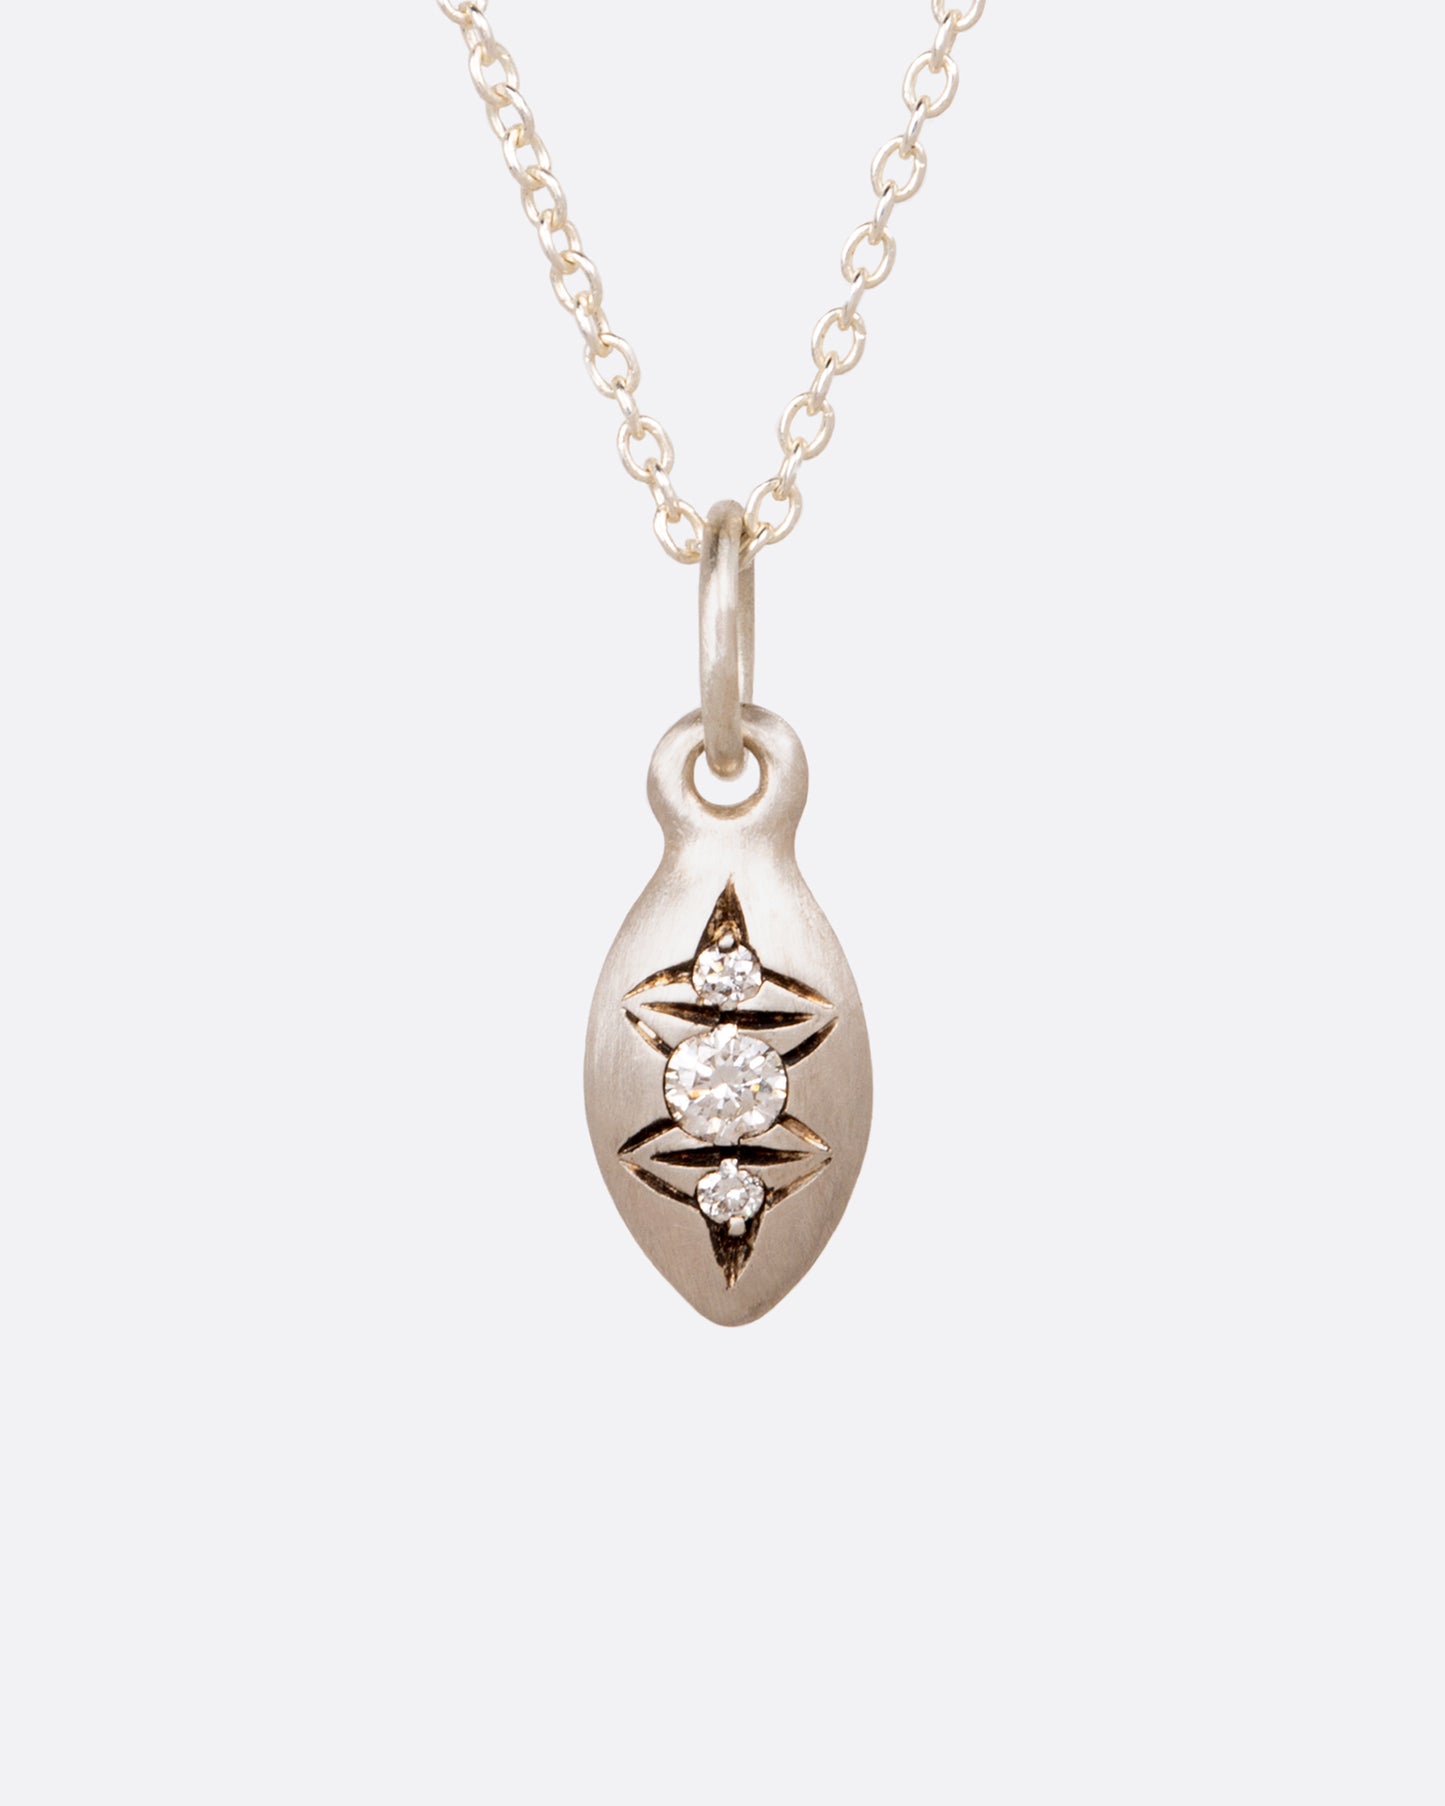 A pepita seed shaped pendant with three diamonds and oxidized etching.